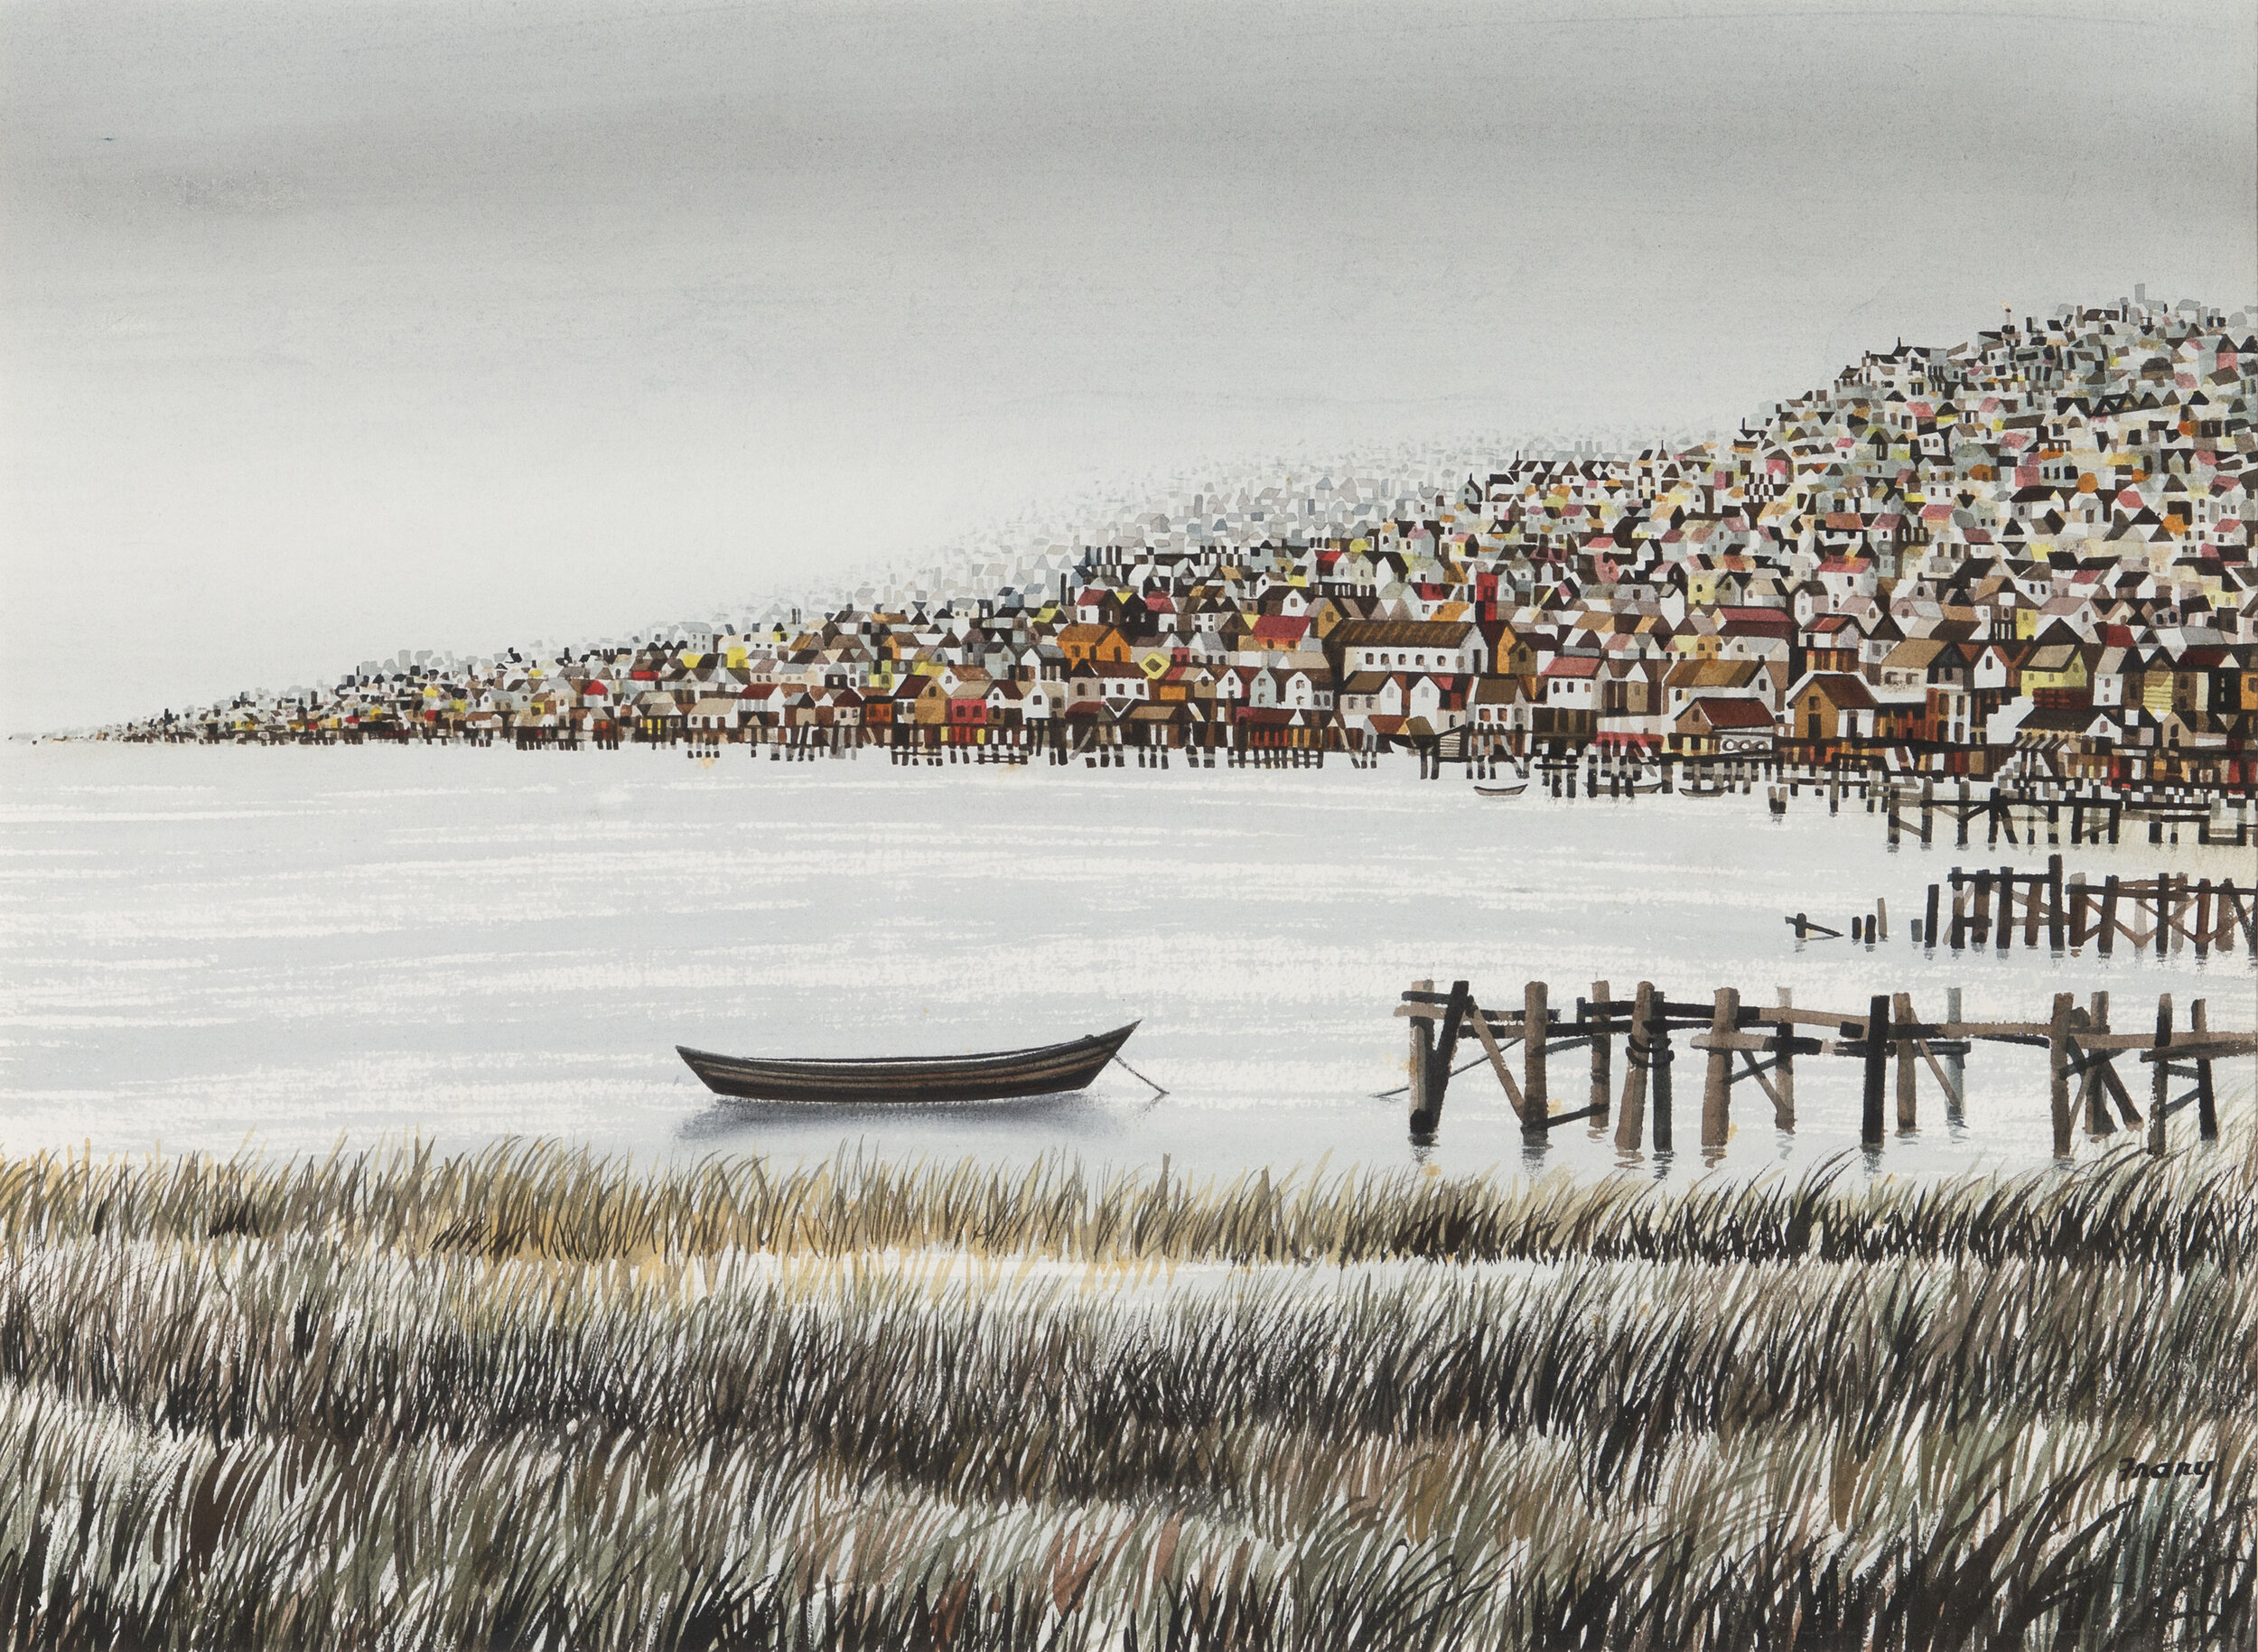 MICHAEL FRARY, Row Boat, 1959, watercolor on paper, Collection of the Grace Museum, Gift of Dorothy and Terrell Blodgett